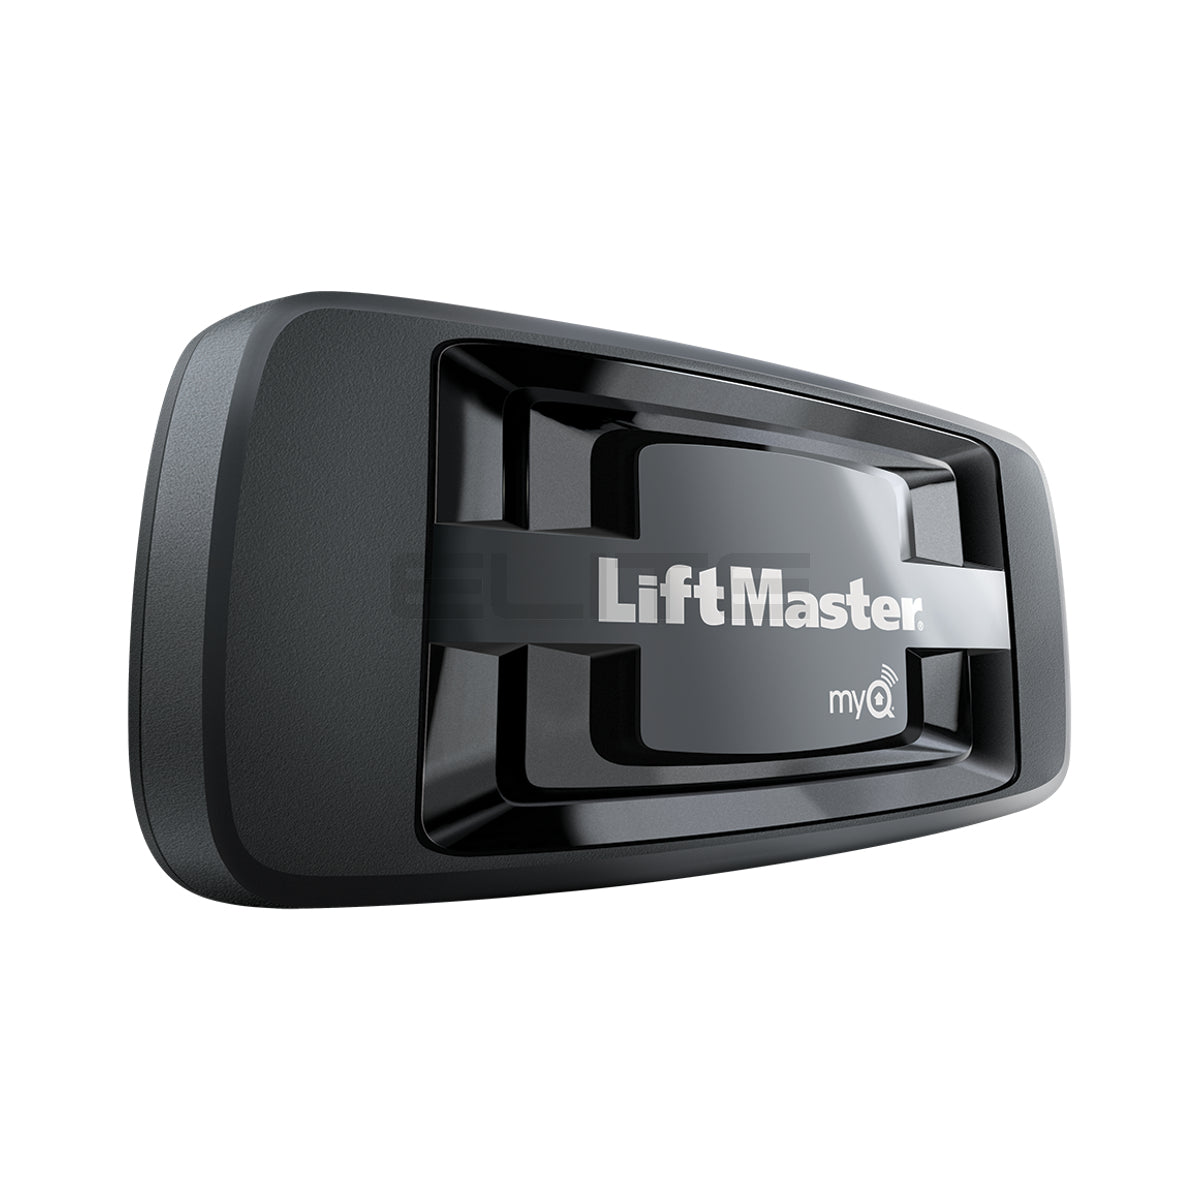 Liftmaster 828lm that comes with bundle